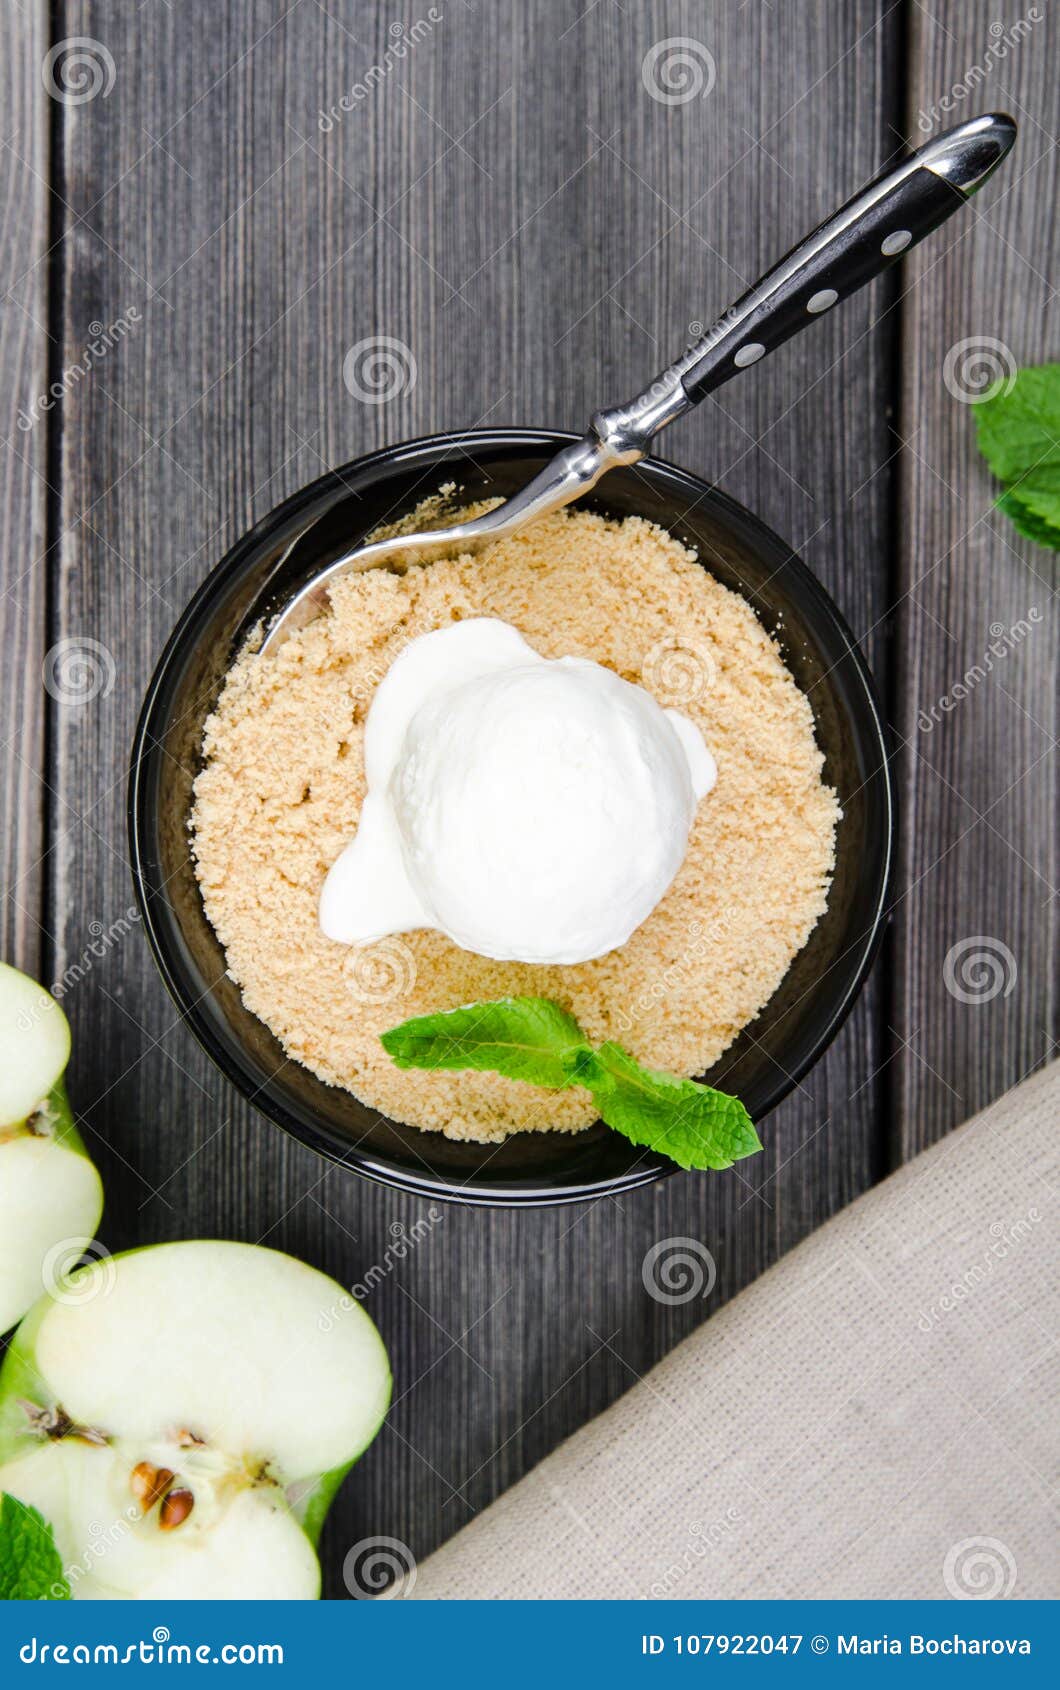 Top View Close Up Apple Crumble Dessert with Vanilla Ice Cream, Green ...